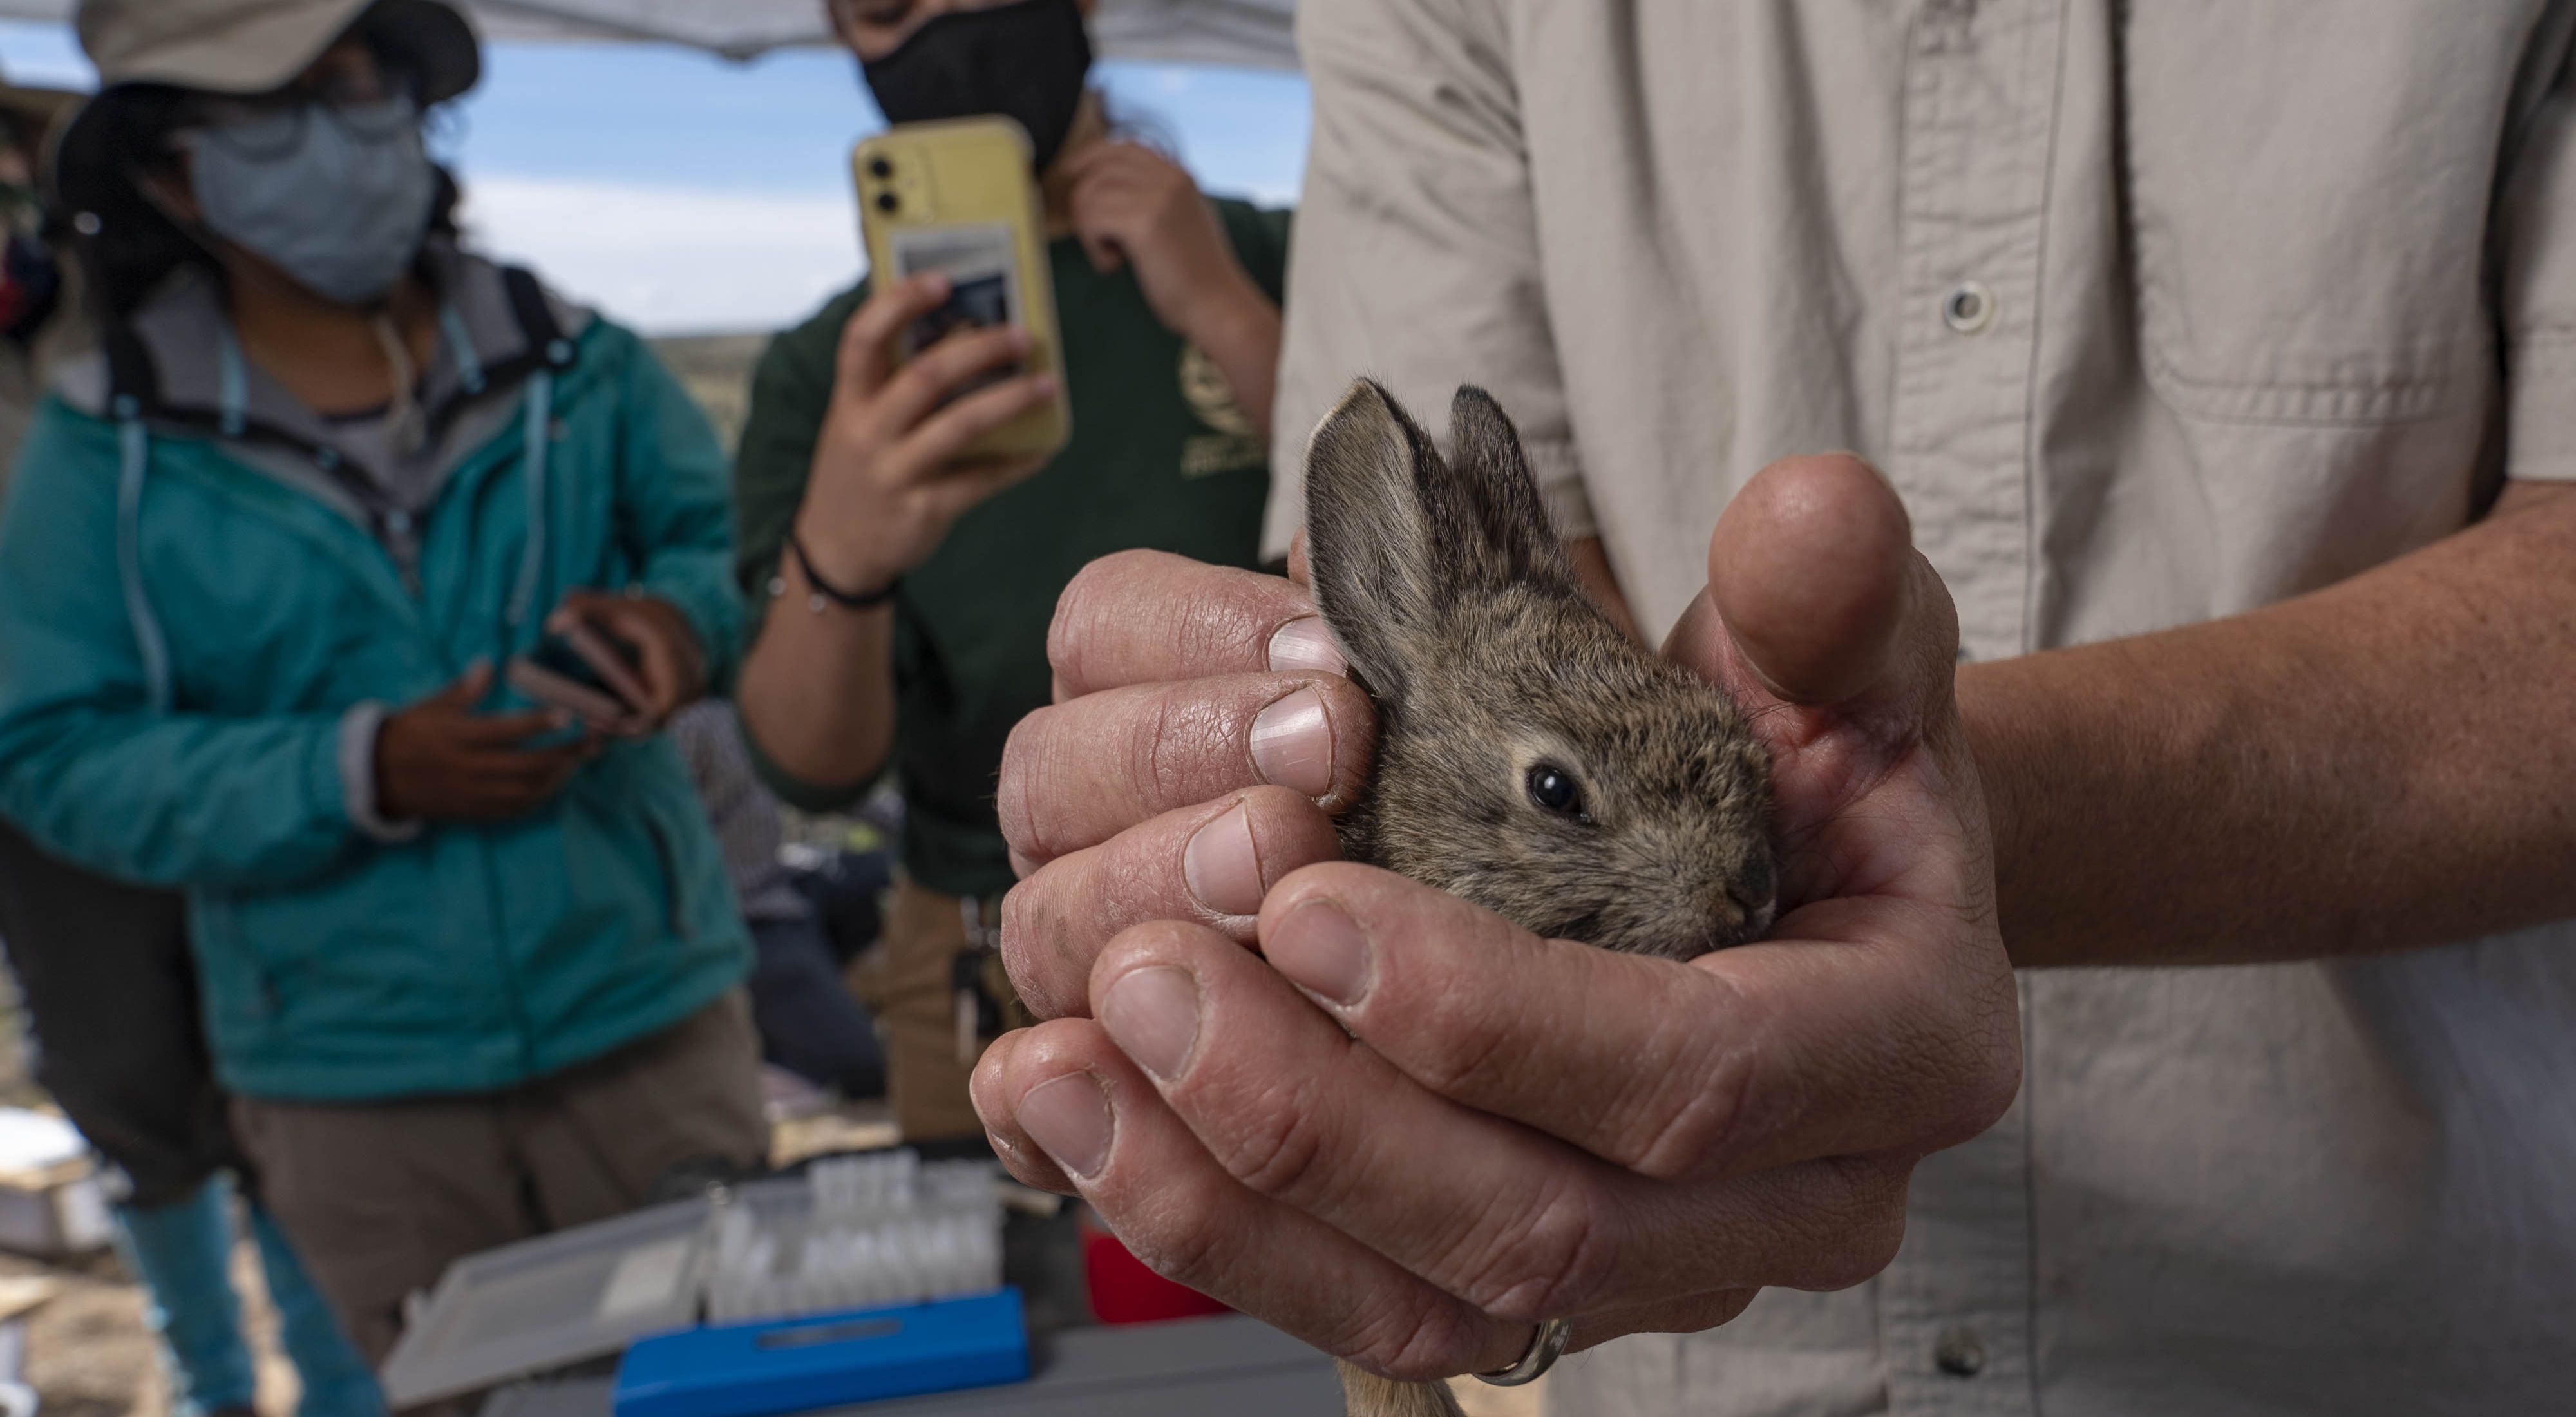 close up image of small rabbit, barely larger than the hands holding the rabbit